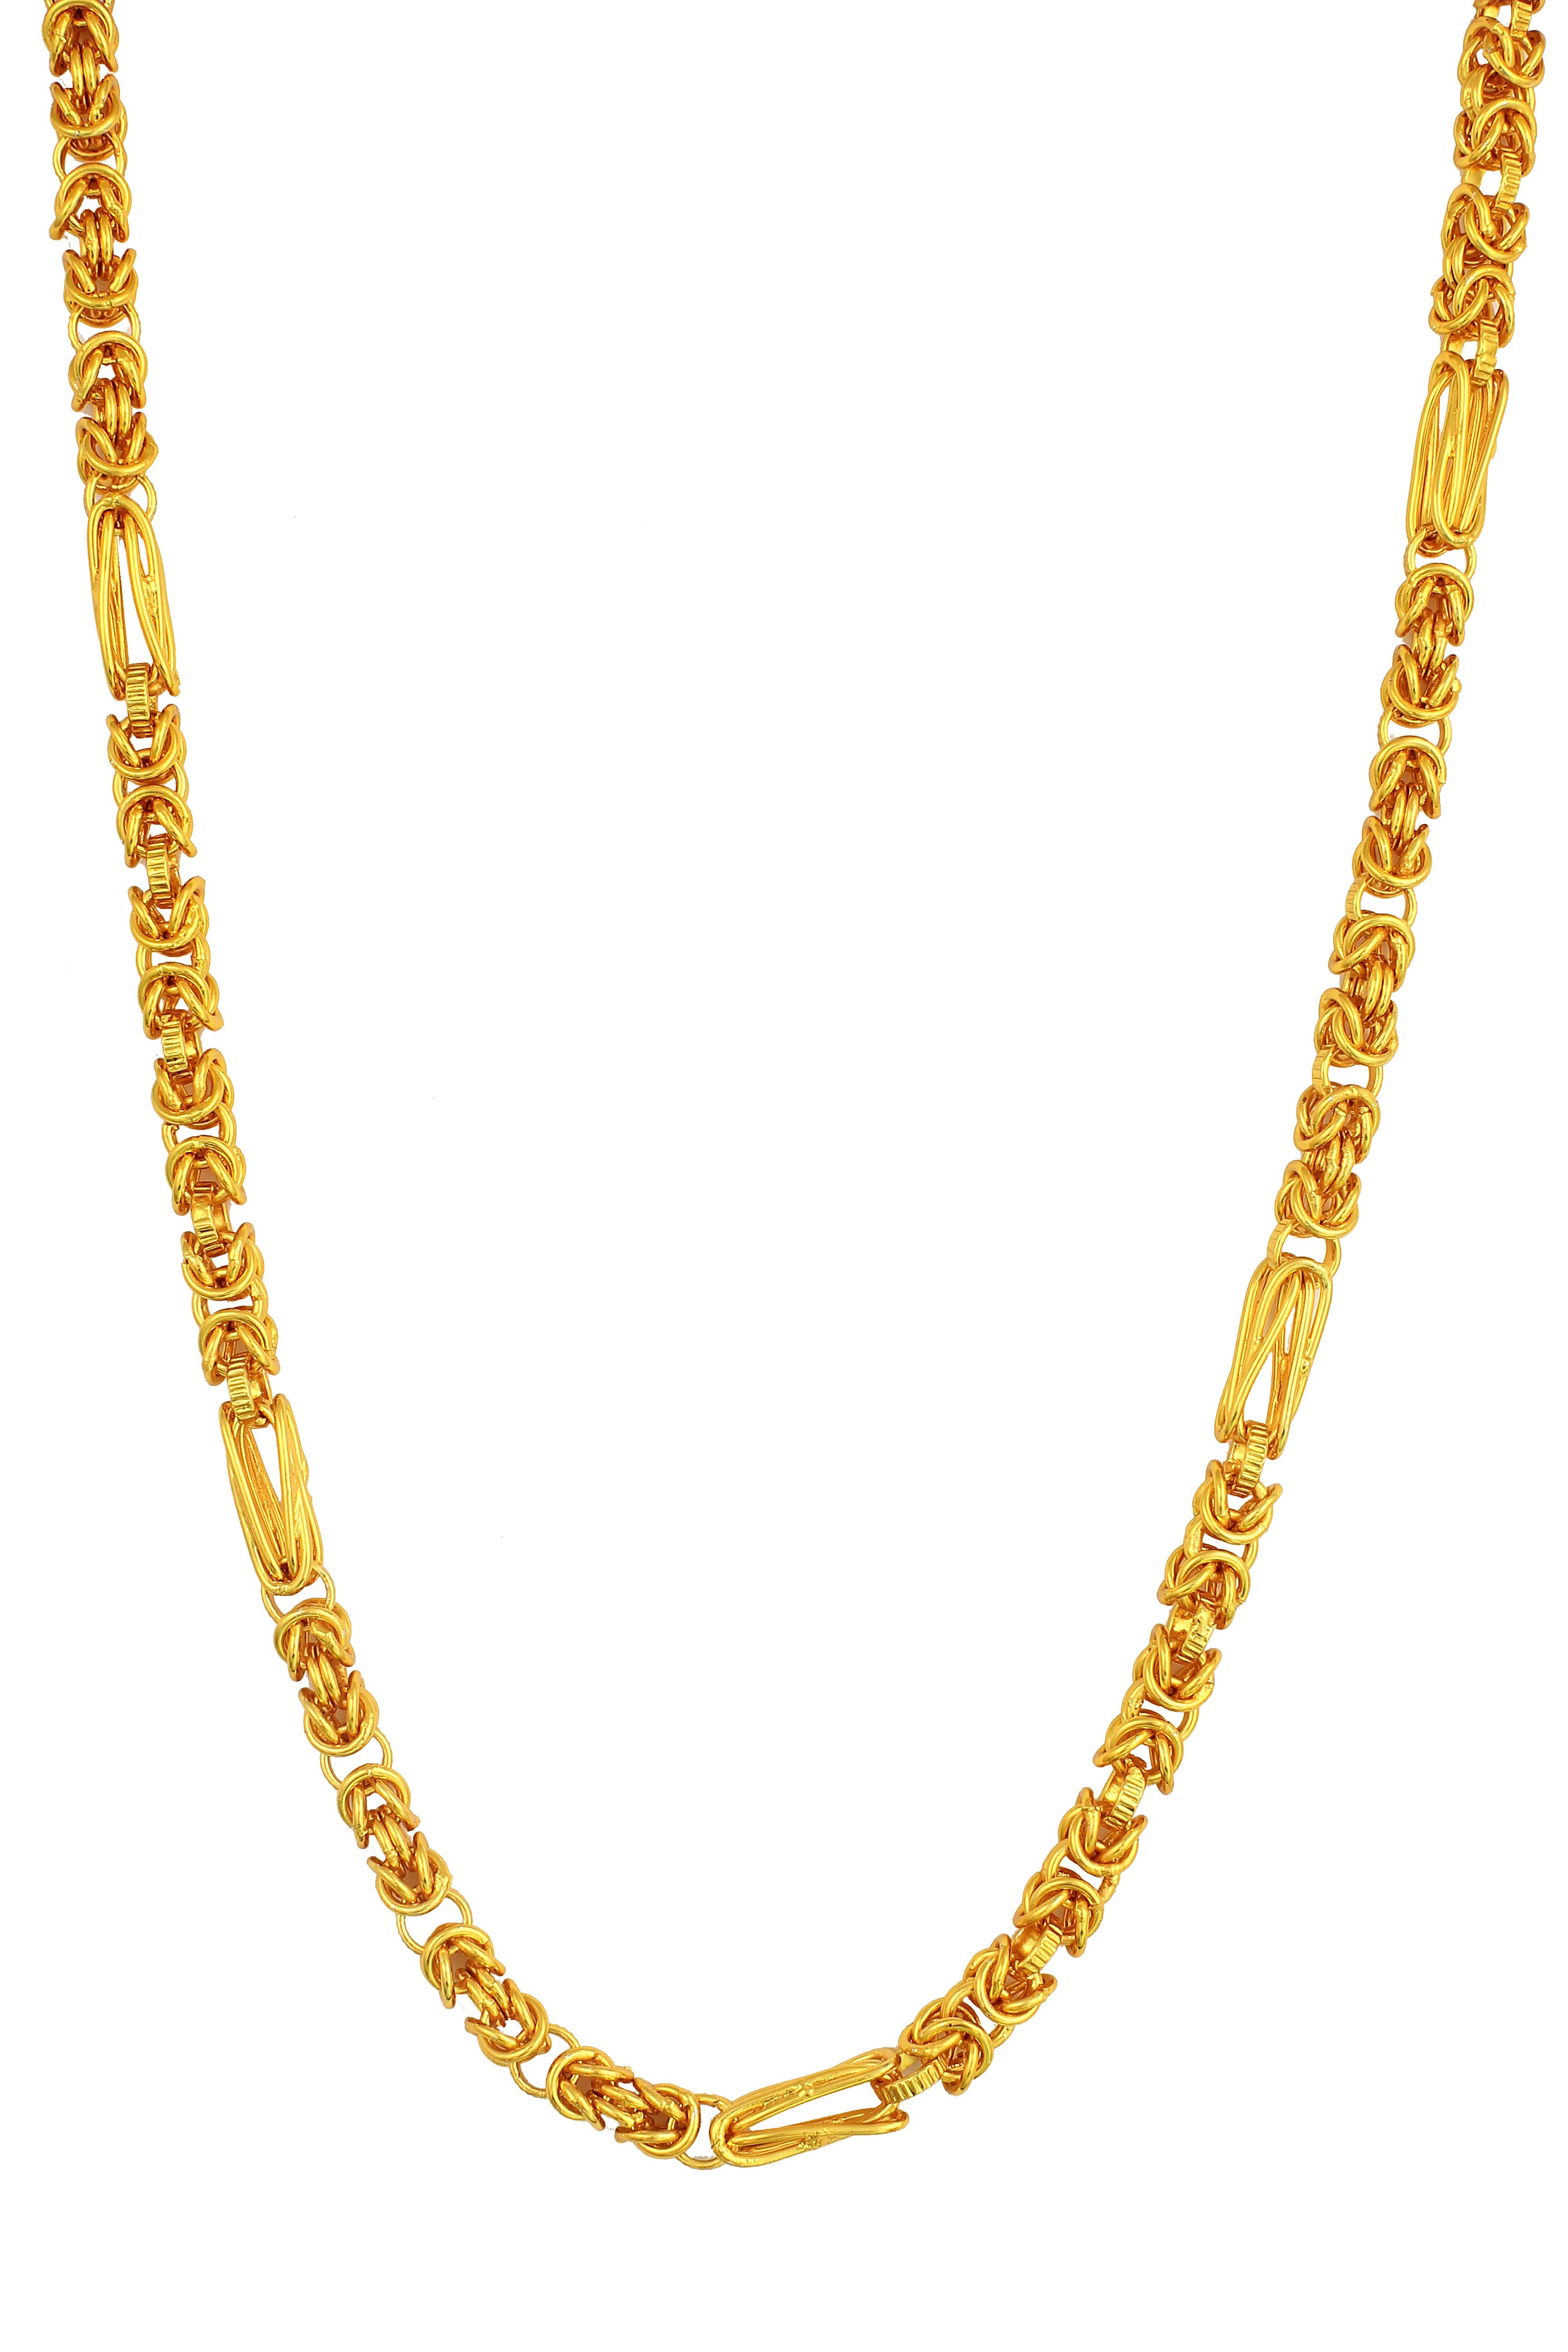 Dipali Designer Gold Plated Chain For Mens & Boys Buy Dipali Designer Gold Plated Chain For